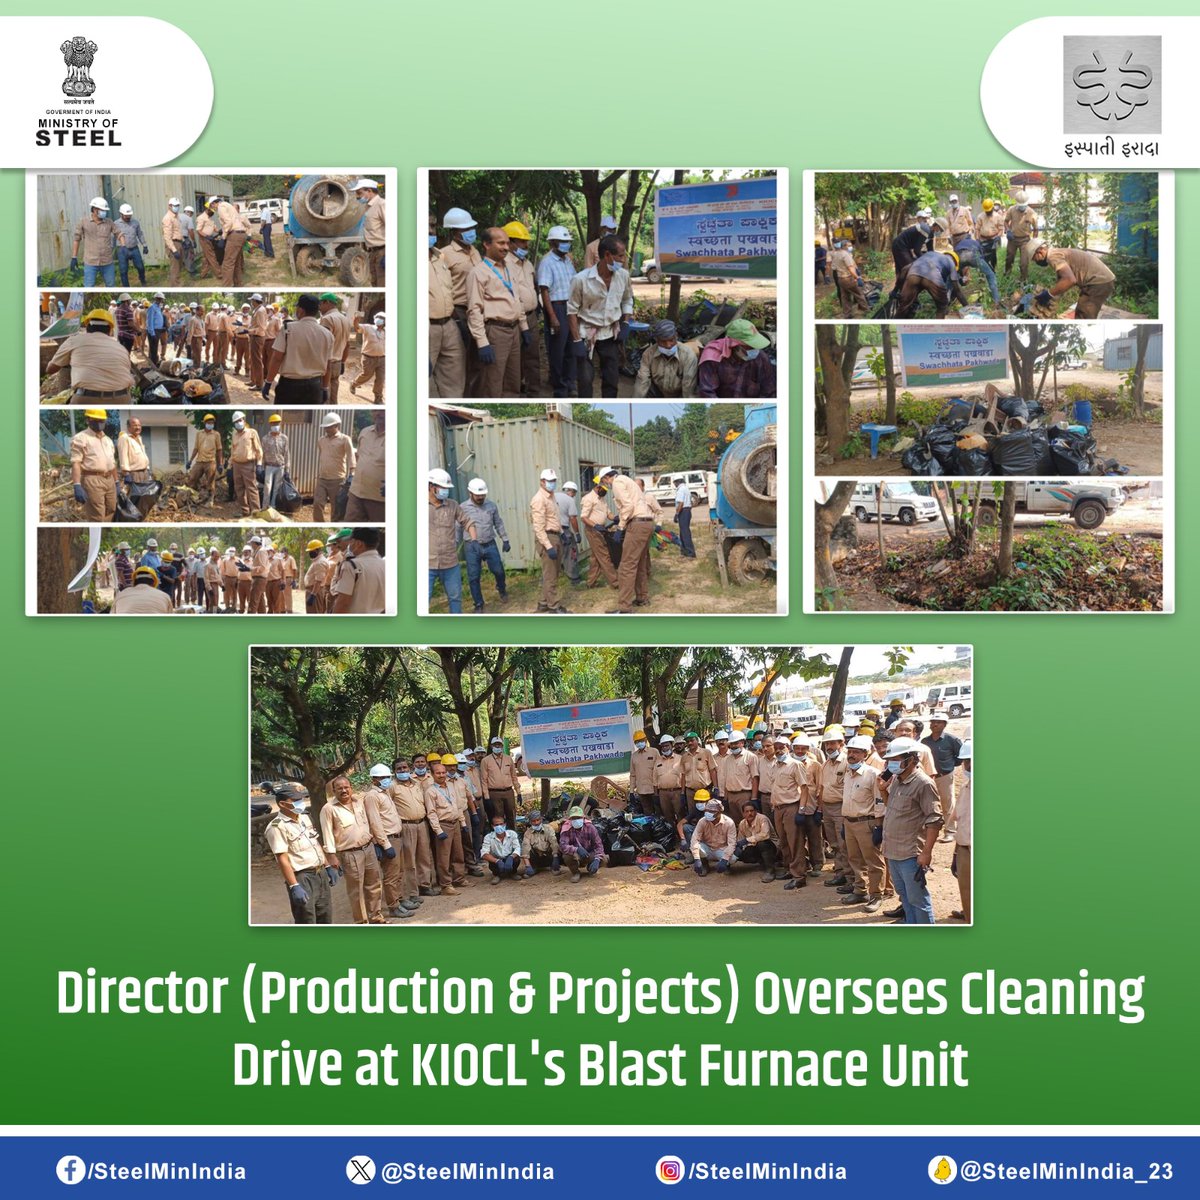 #KIOCL's Director (Production & Projects) leads cleaning efforts in front of CPP opposite the Coke Oven Site, emphasizing the company's commitment to cleanliness and maintenance.

#CleanUpDrive #SwachhataPakhwada